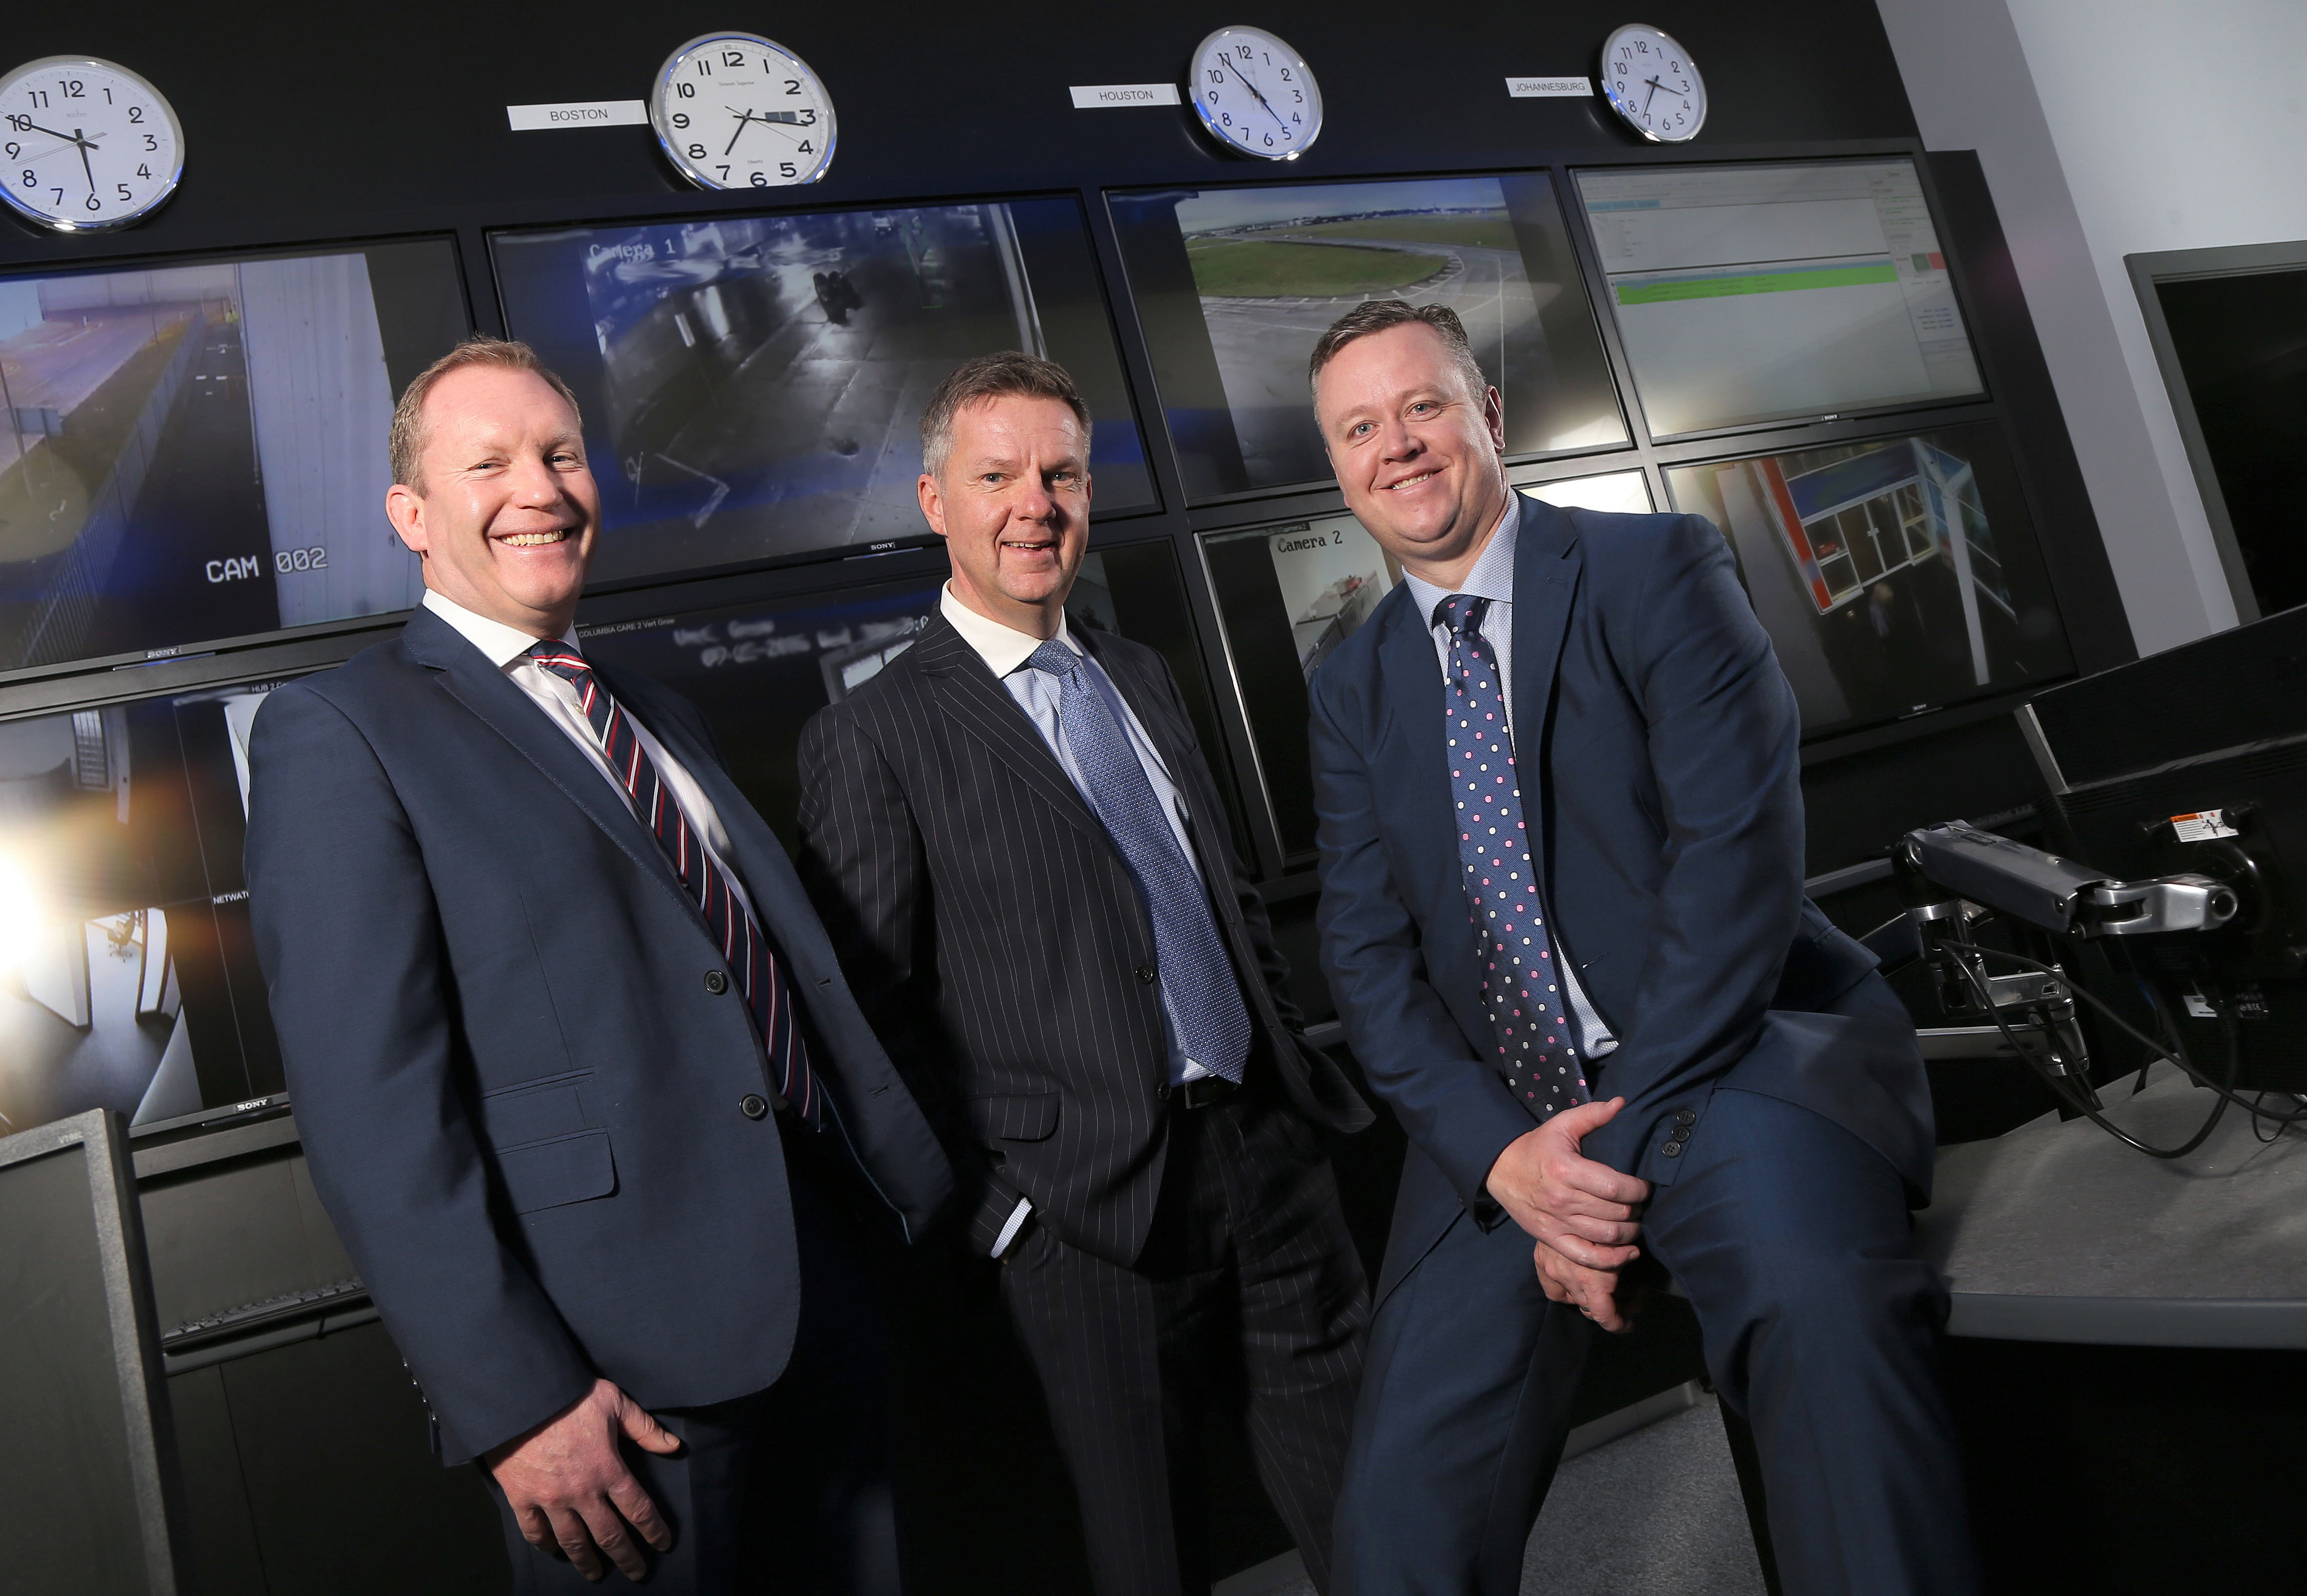 High tech security firm Netwatch to double its Newry workforce